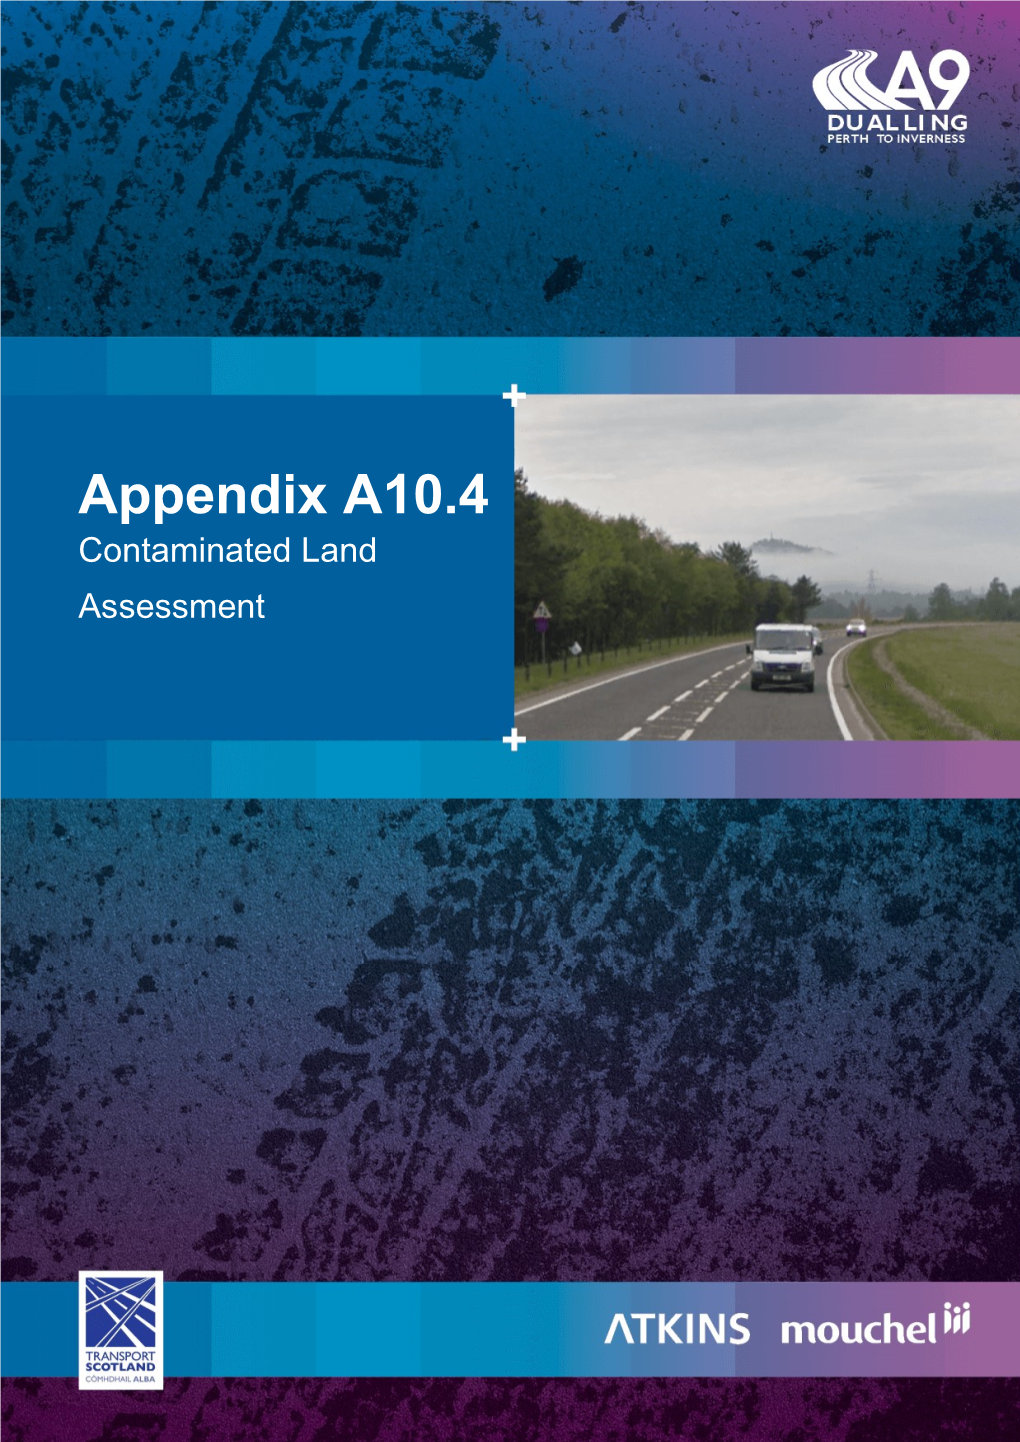 Appendix A10.4 Contaminated Land Assessment A9 Dualling Northern Section (Dalraddy to Inverness) A9 Dualling Tomatin to Moy Stage 3 Environmental Statement